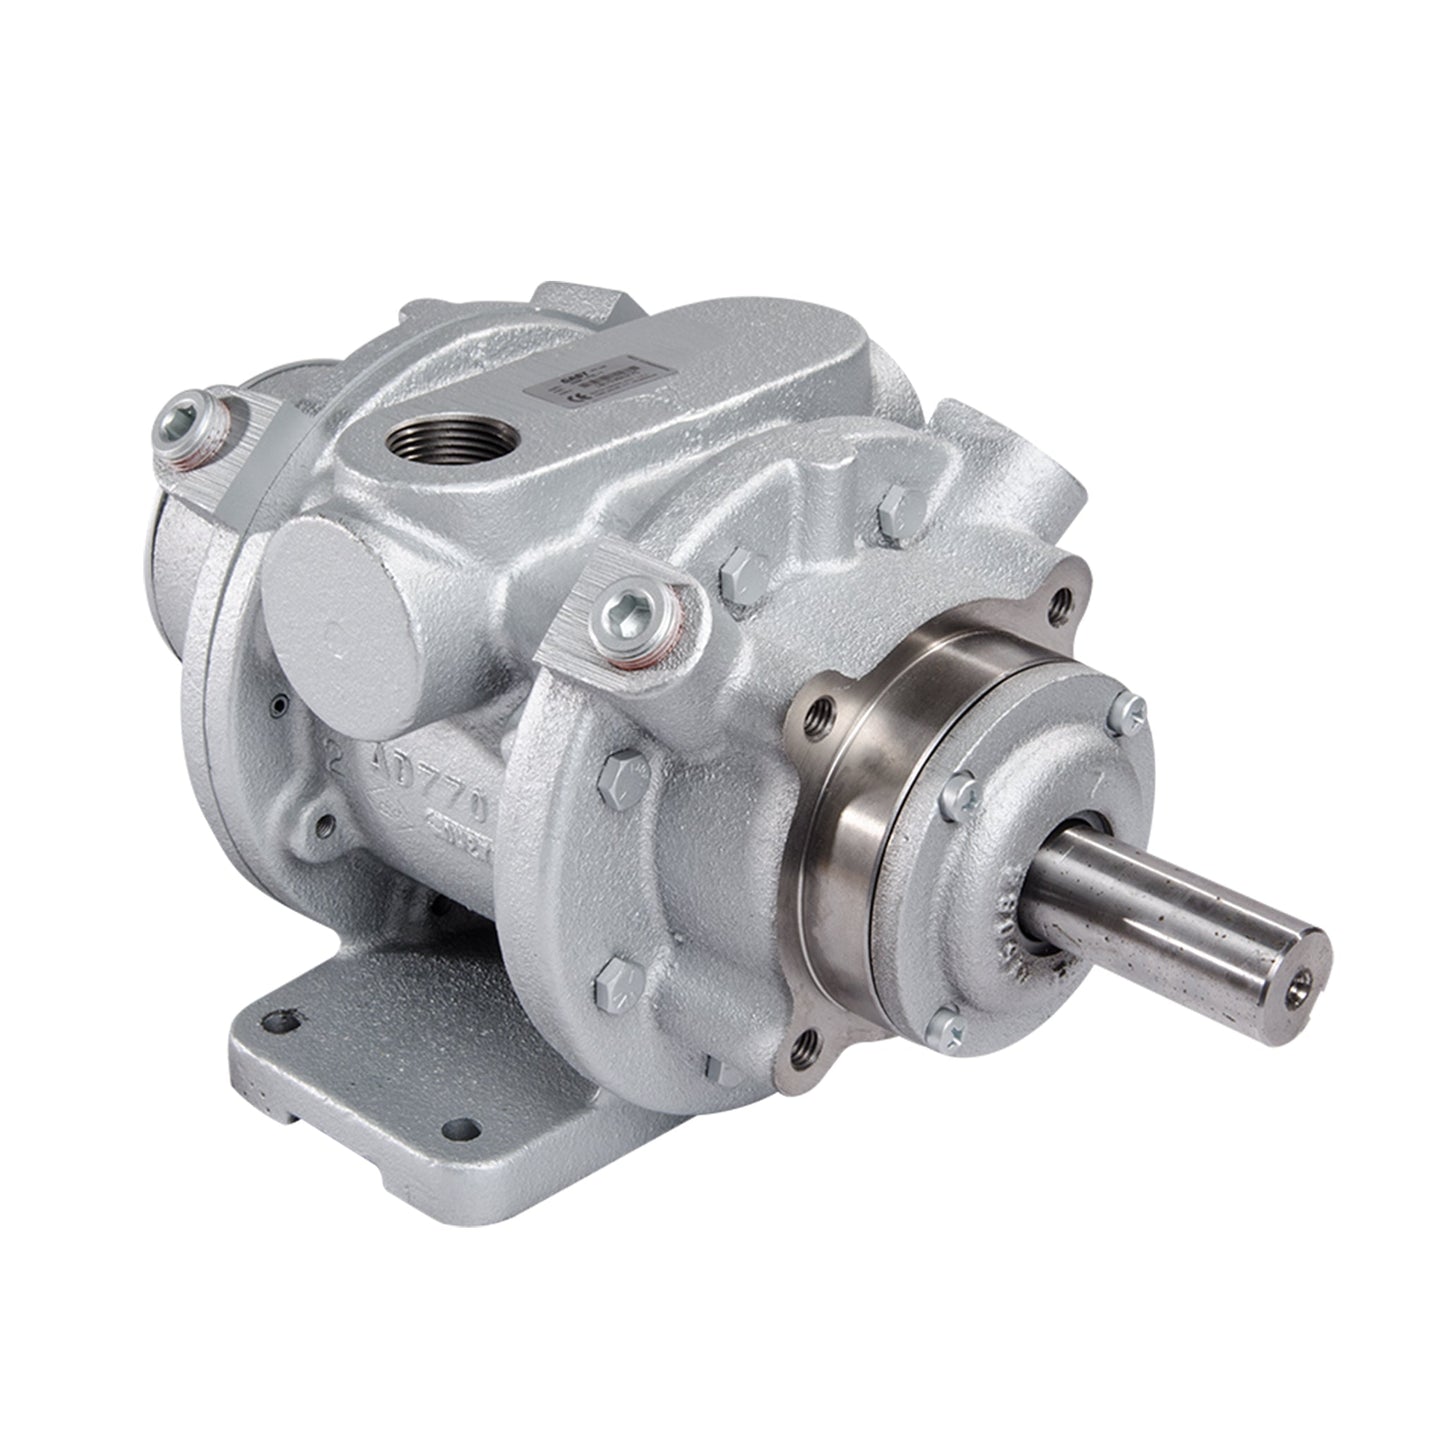 Gast 16AM-FRV-2 9 hp C Face Mounted Air Motor with 7/8 in Shaft Dia. and 1-1/4 in NPT Port Size